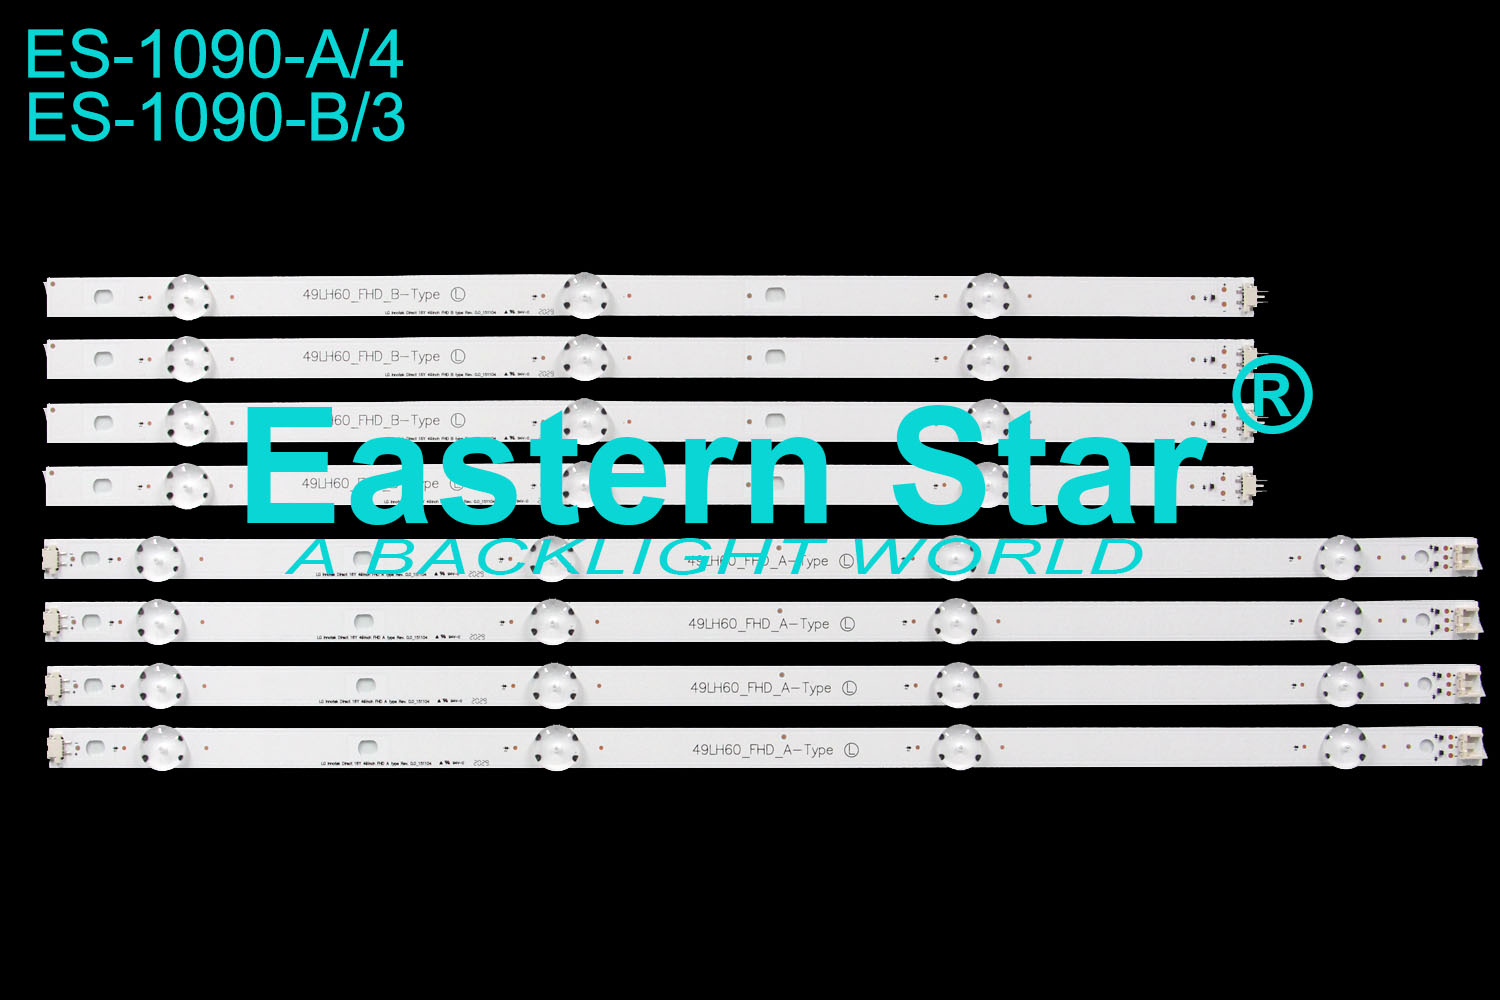 ES-1090 LED TV Backlight use for Lg 49'' 49LH60_FHD_A/B-Type  Direct 16Y 49inch FHD A/B type Rev. 0.0 LED STRIPS(8)